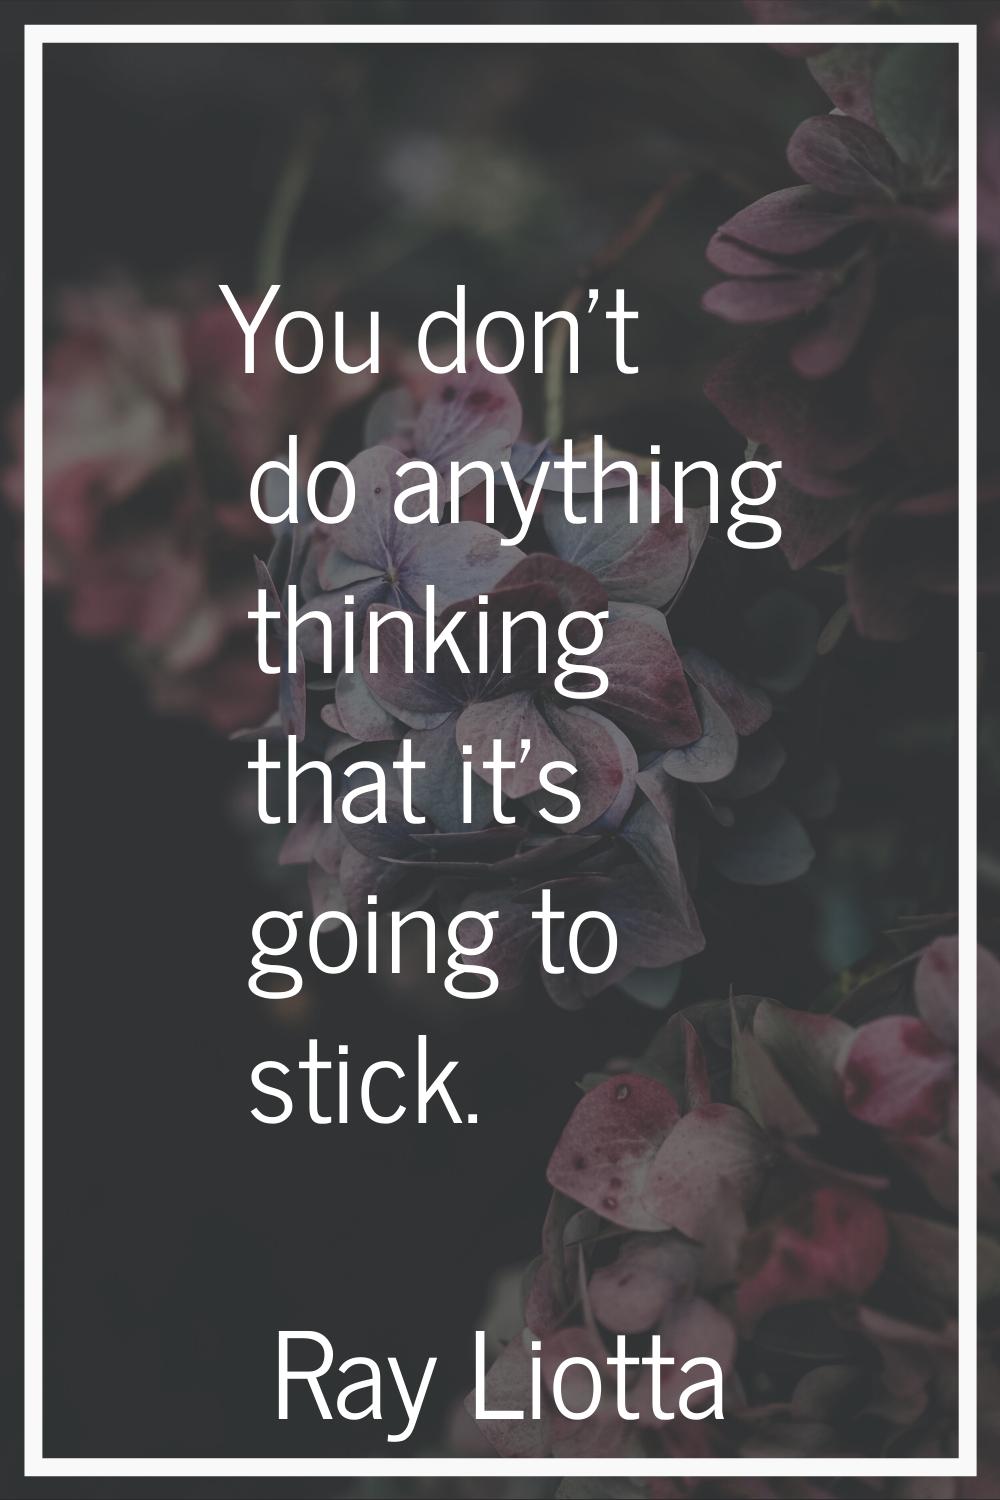 You don't do anything thinking that it's going to stick.